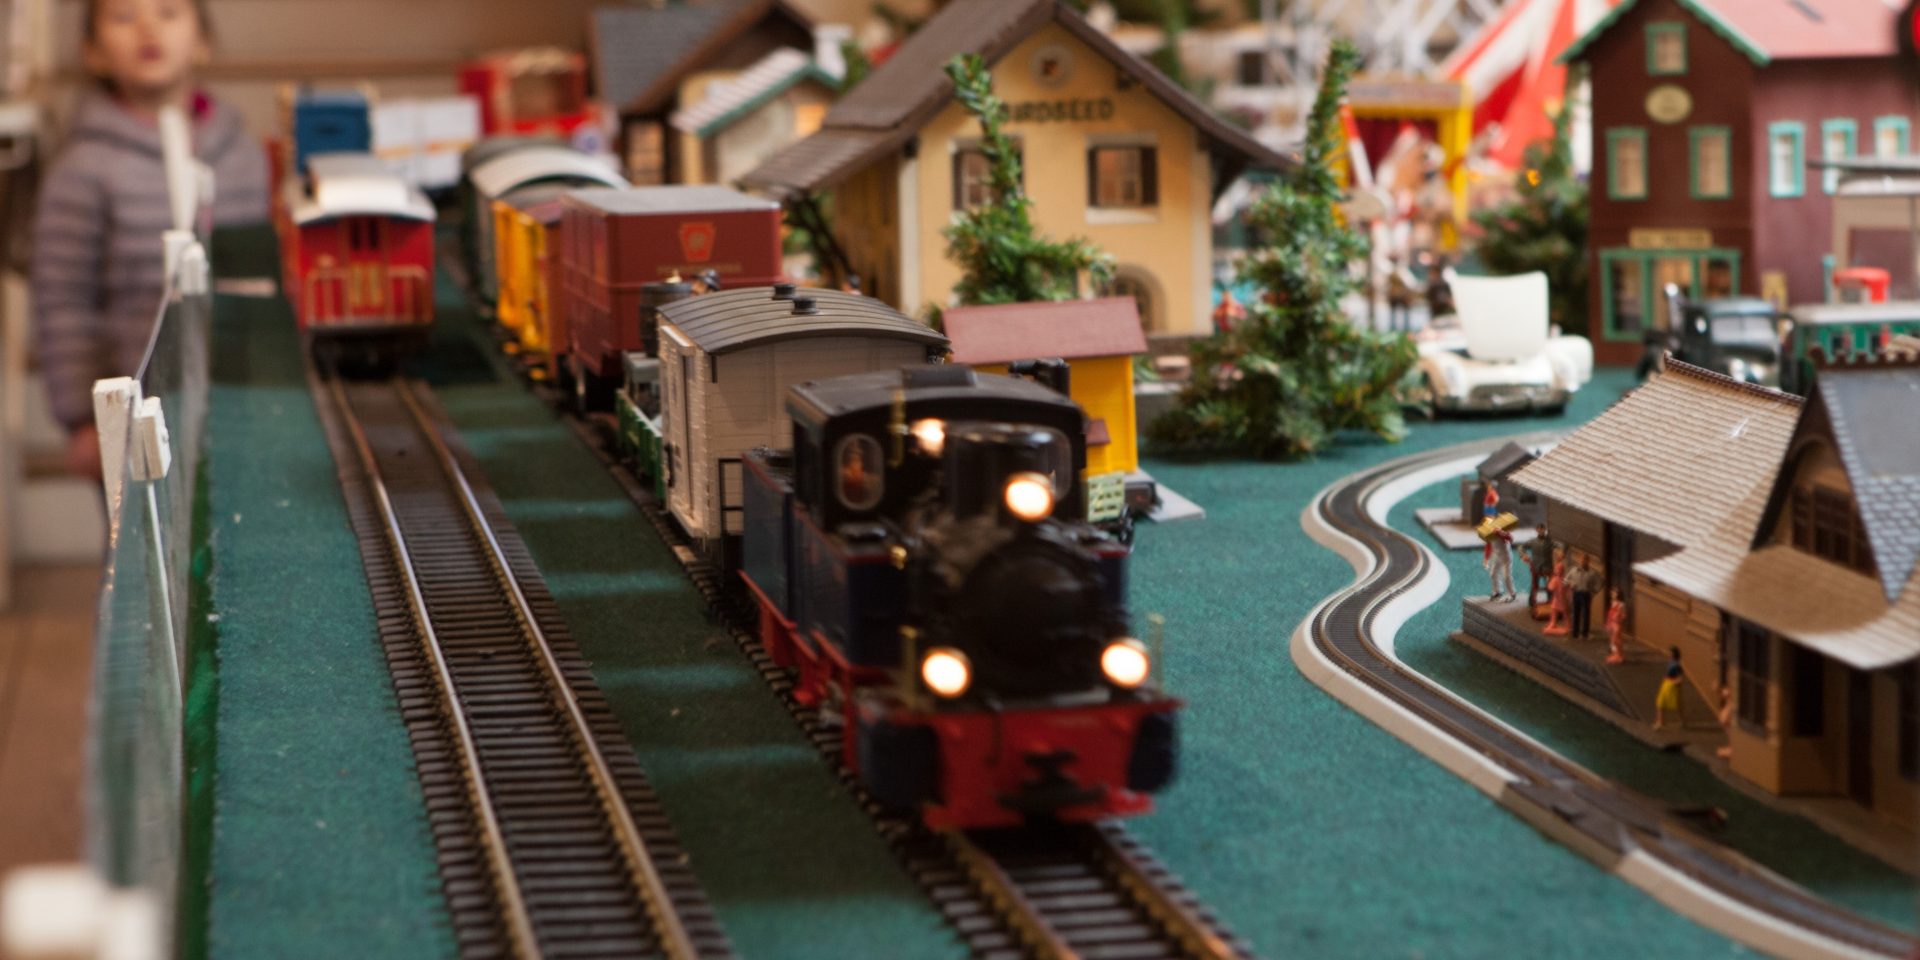 The Great Trains Holiday Show